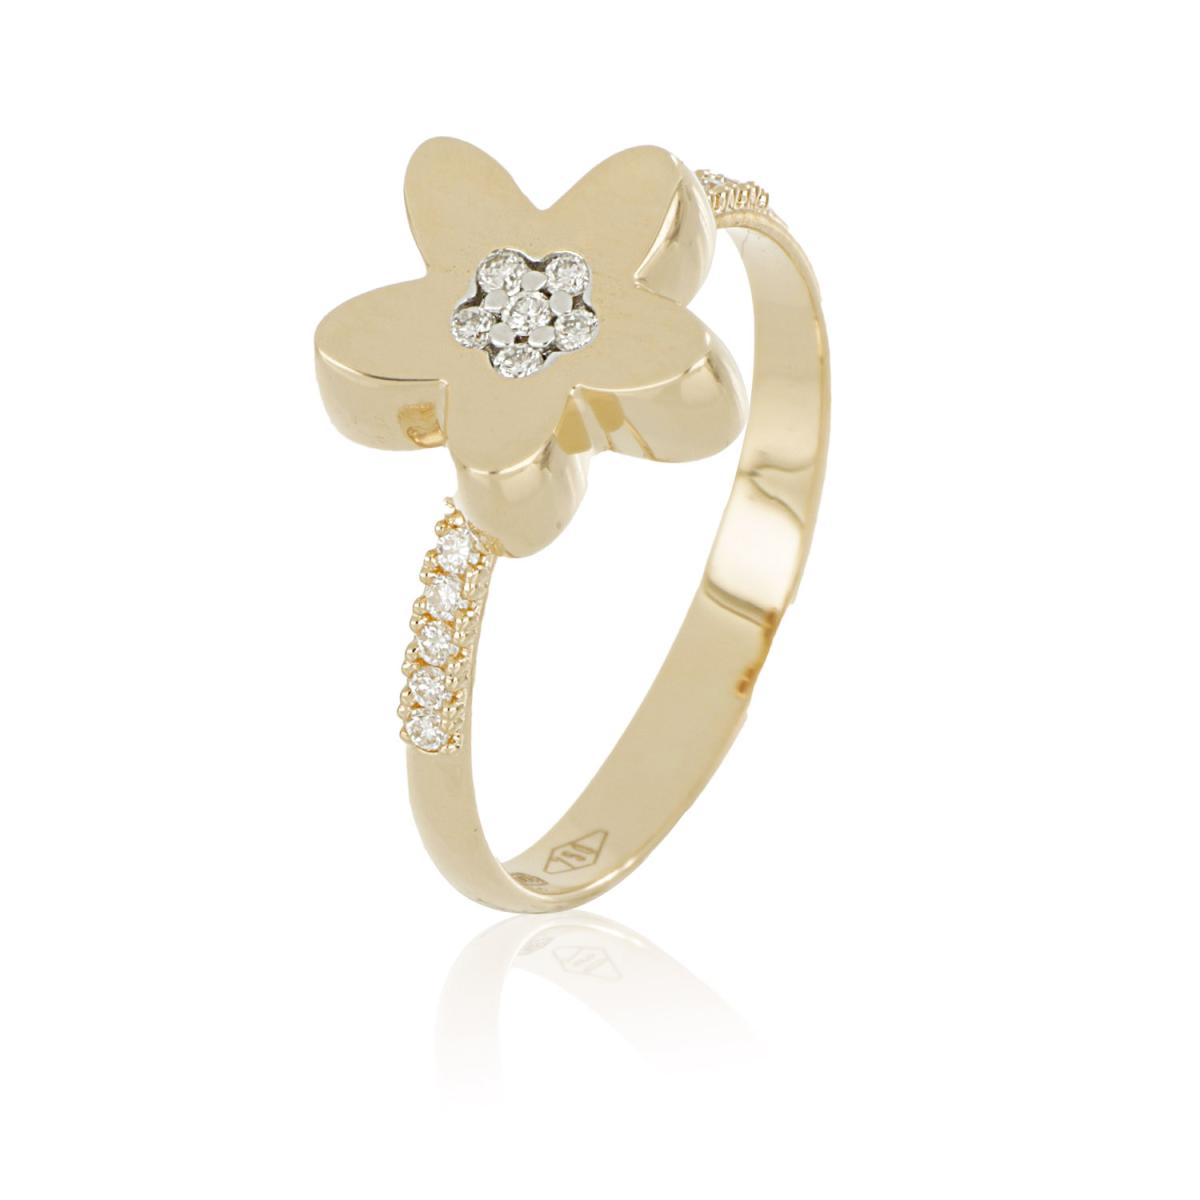 Flower ring in gold and diamonds - AD975